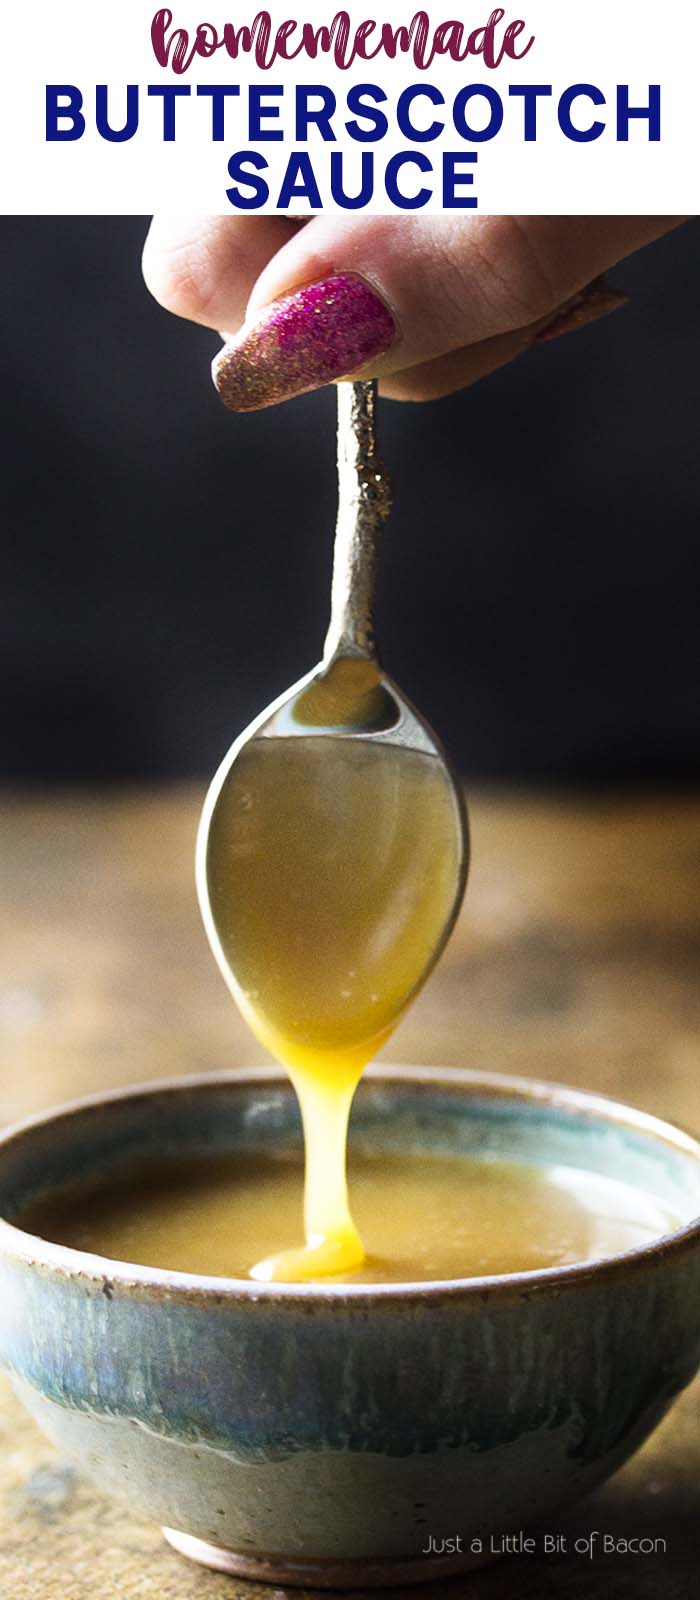 Sauce pouring off a spoon in a bowl with text overlay - Homemade Butterscotch Sauce.